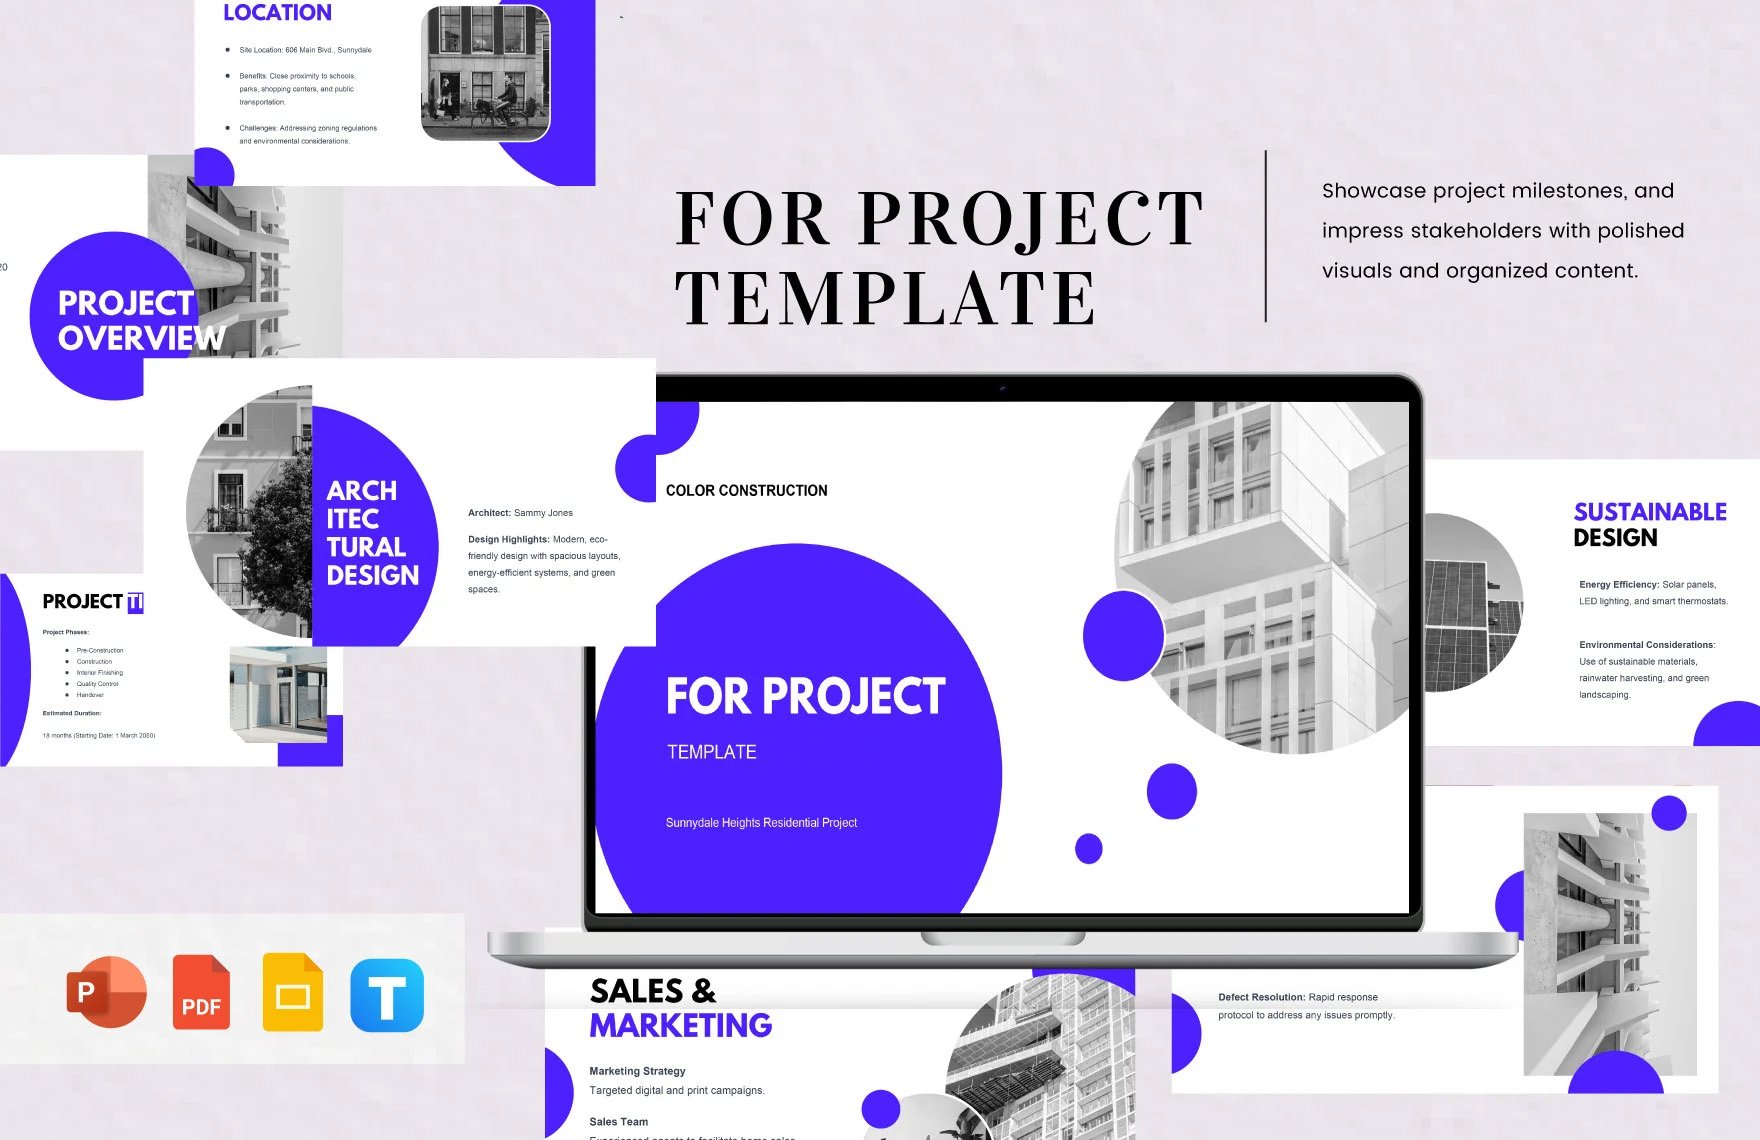 For Project Template